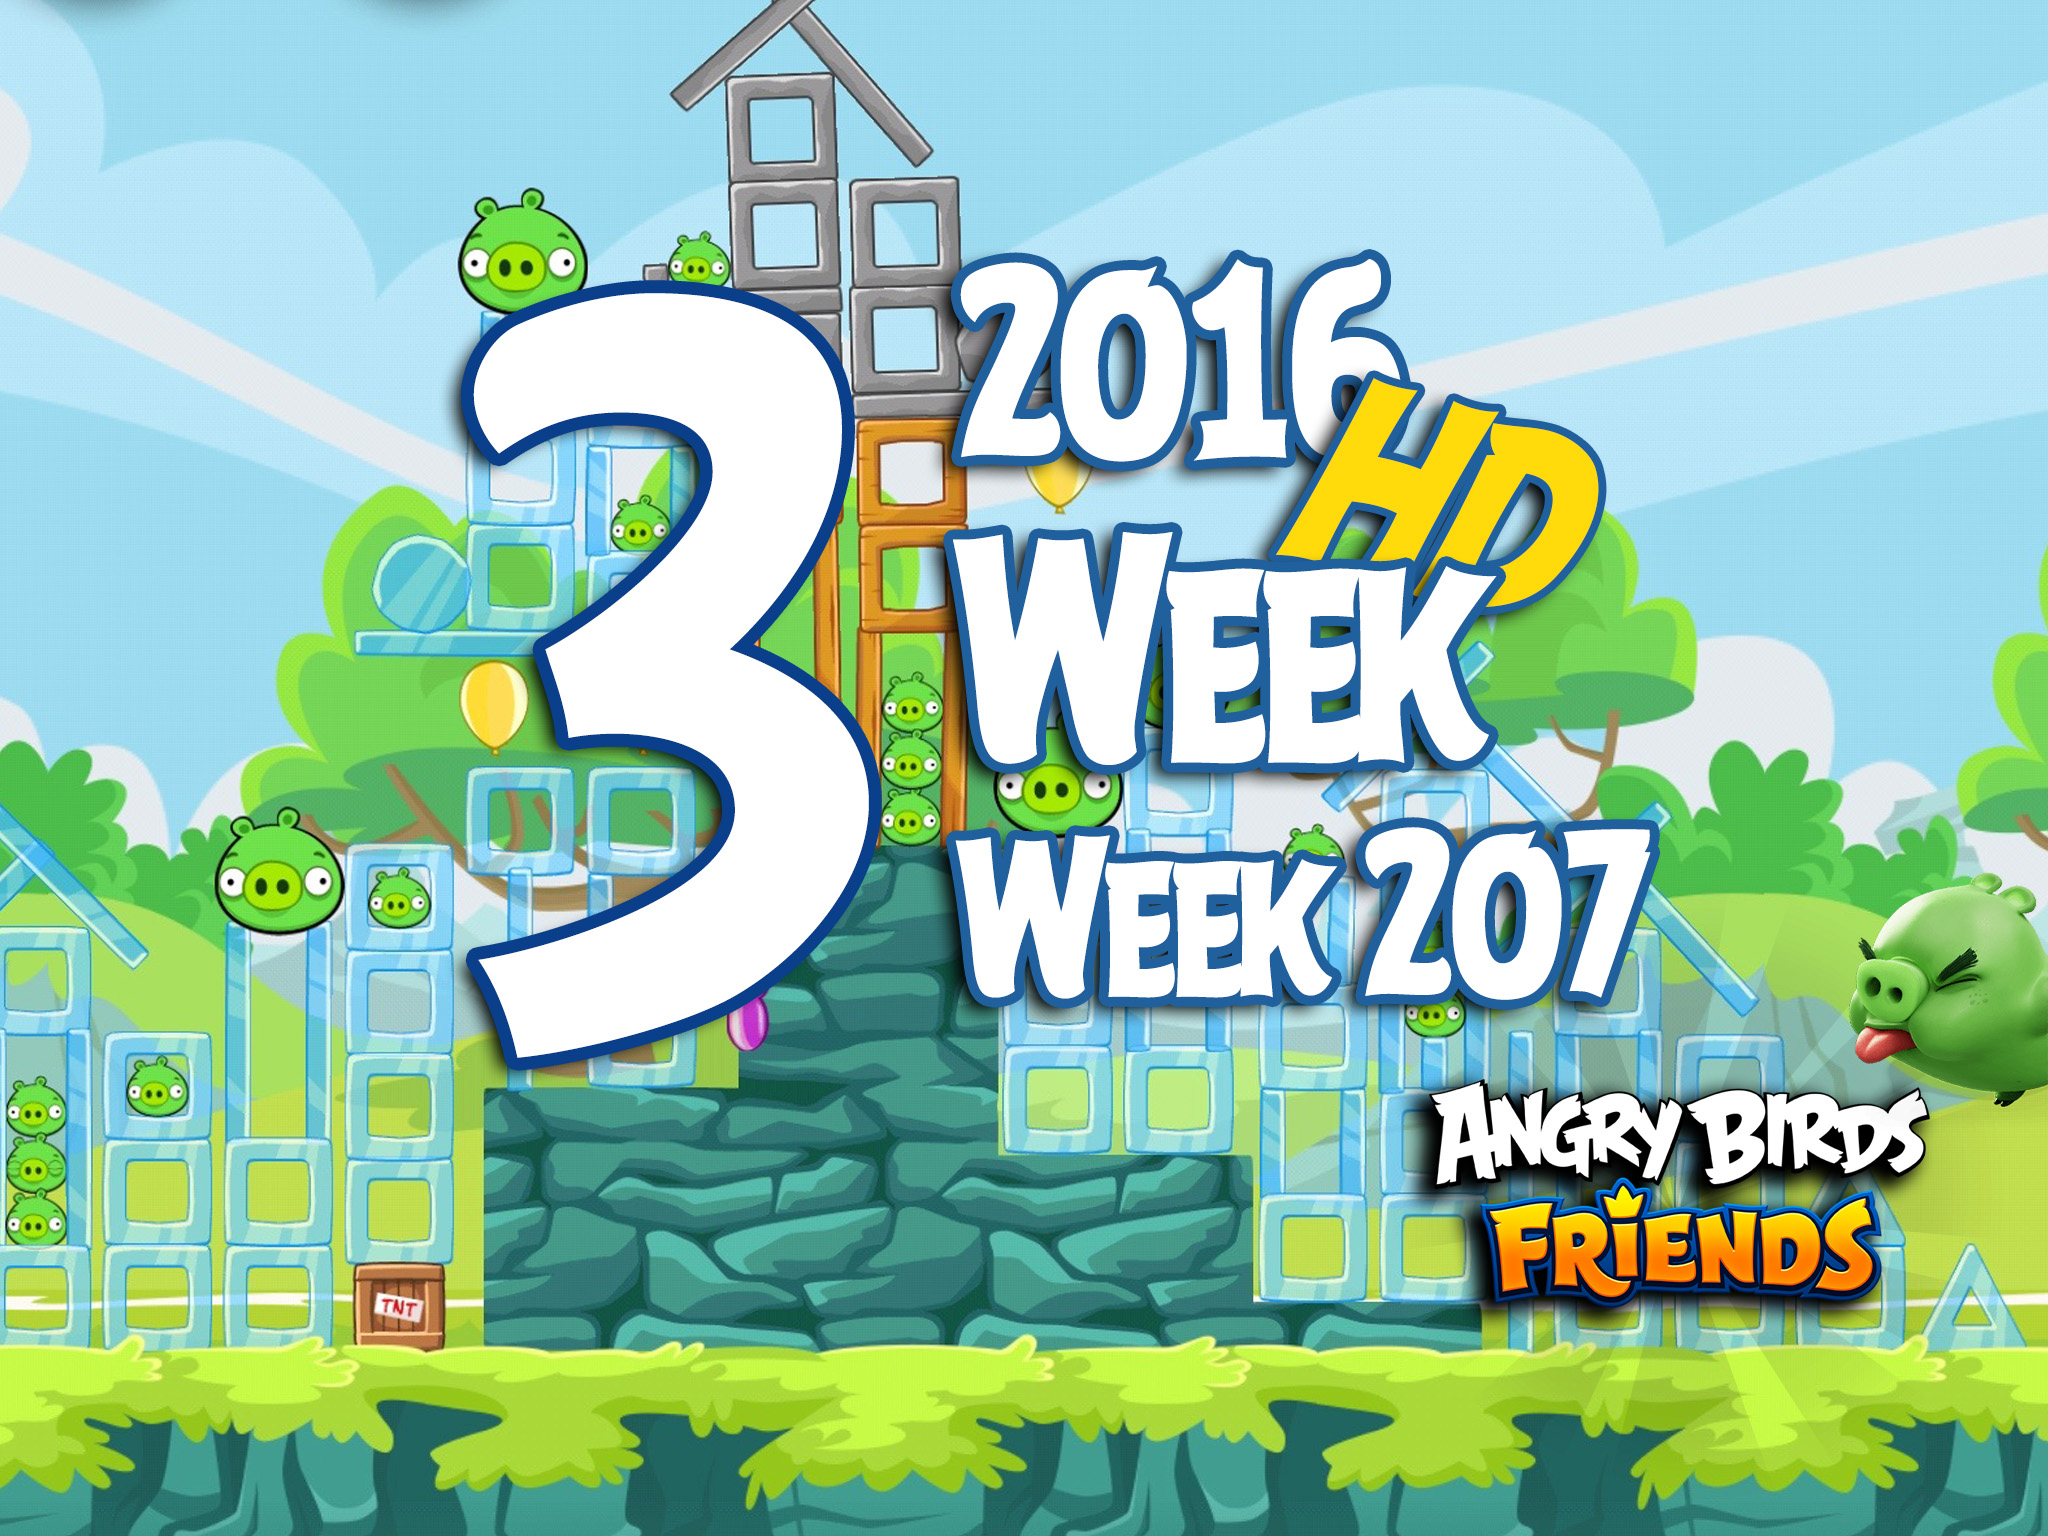 angry birds friends weekly tournament week 276a 2017